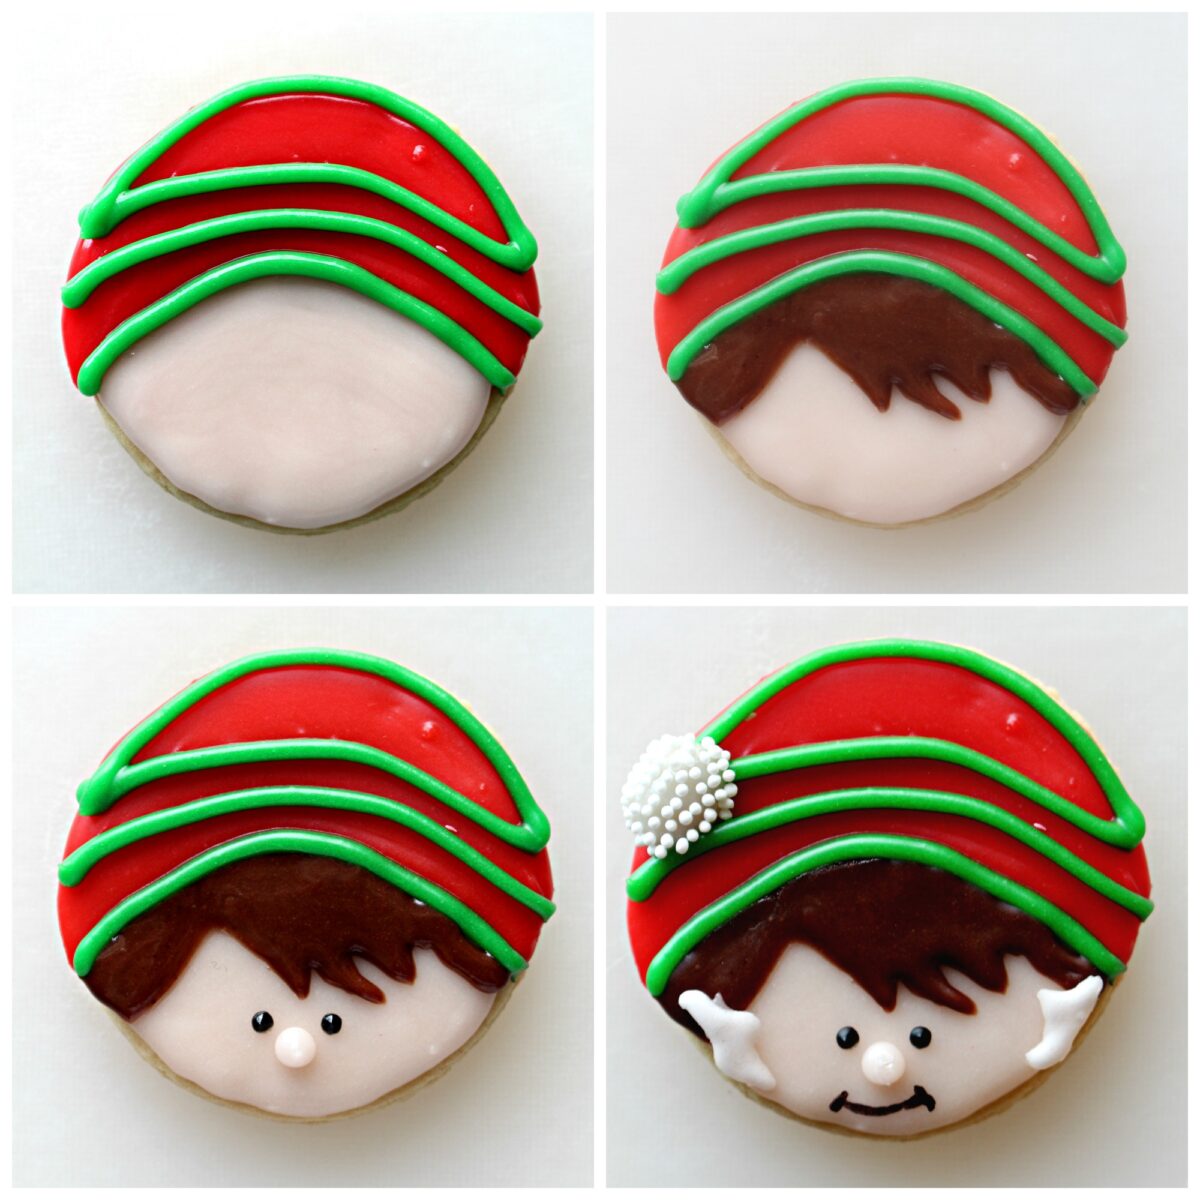 Decorating instructions: add green stripes, brown hair,  eyes and nose, ears and hat pompom.